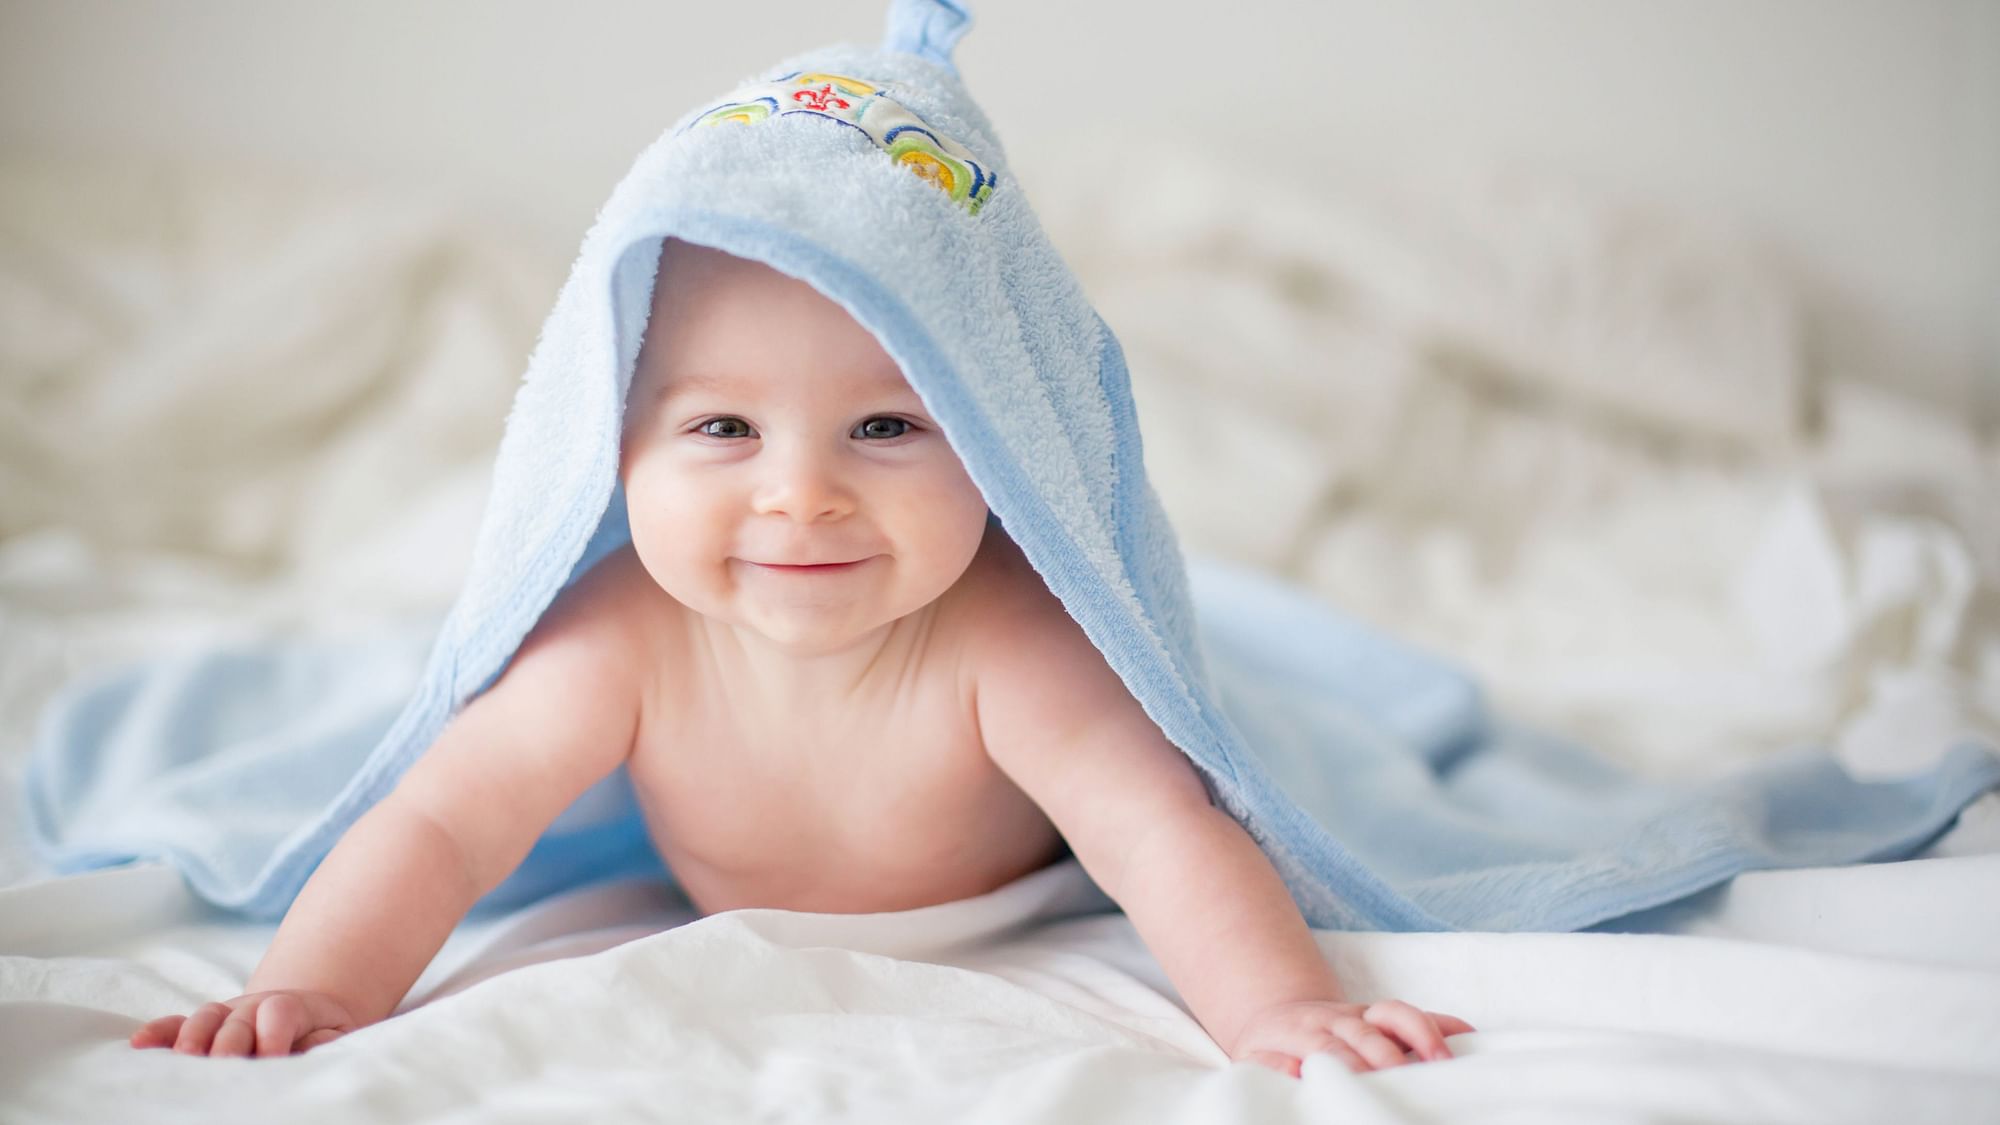 Researchers have found that using daily moisturisers on newborn babies cannot prevent eczema as previously thought.